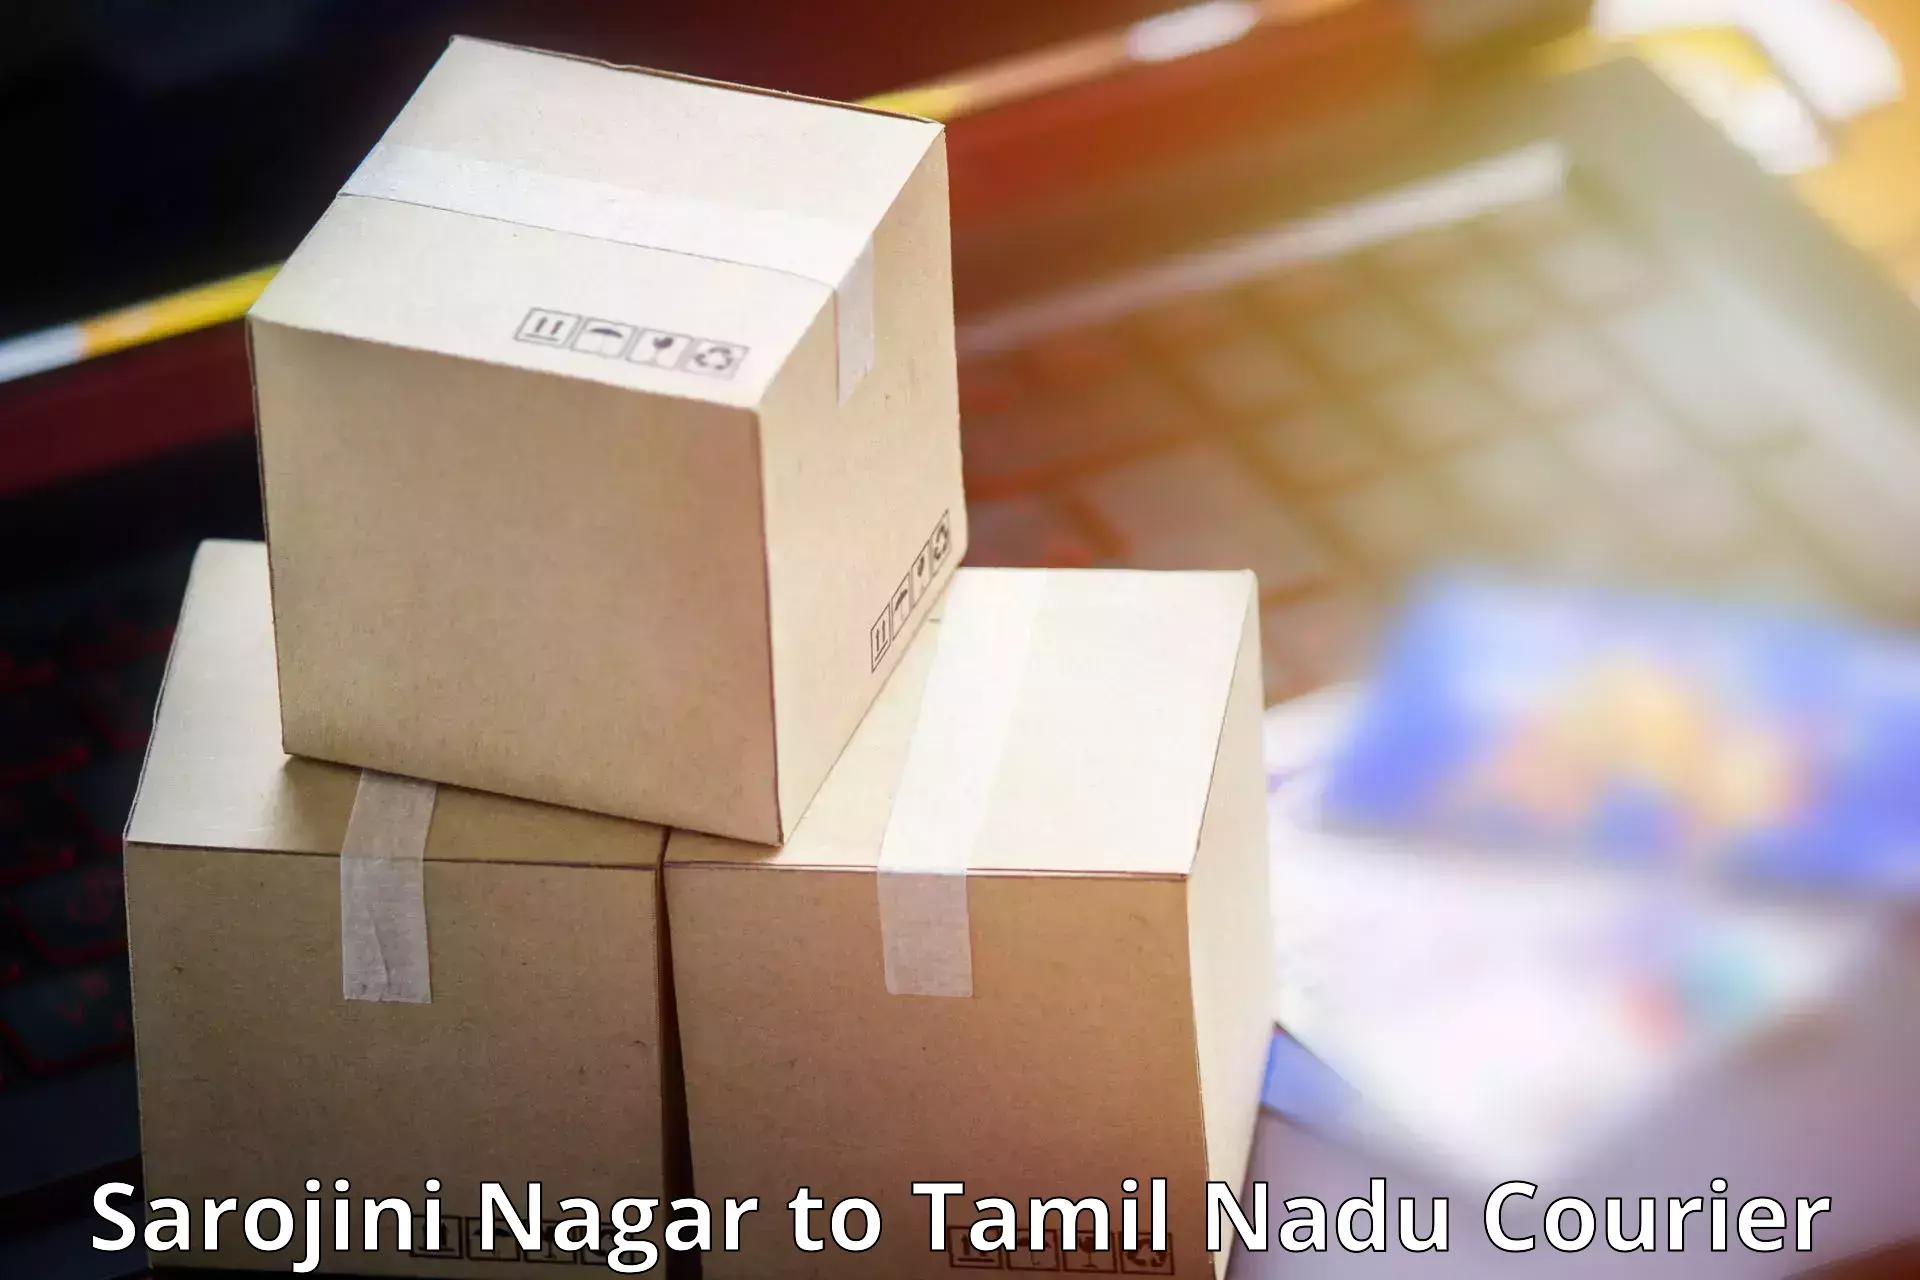 Air courier services Sarojini Nagar to Shanmugha Arts Science Technology and Research Academy Thanjavur